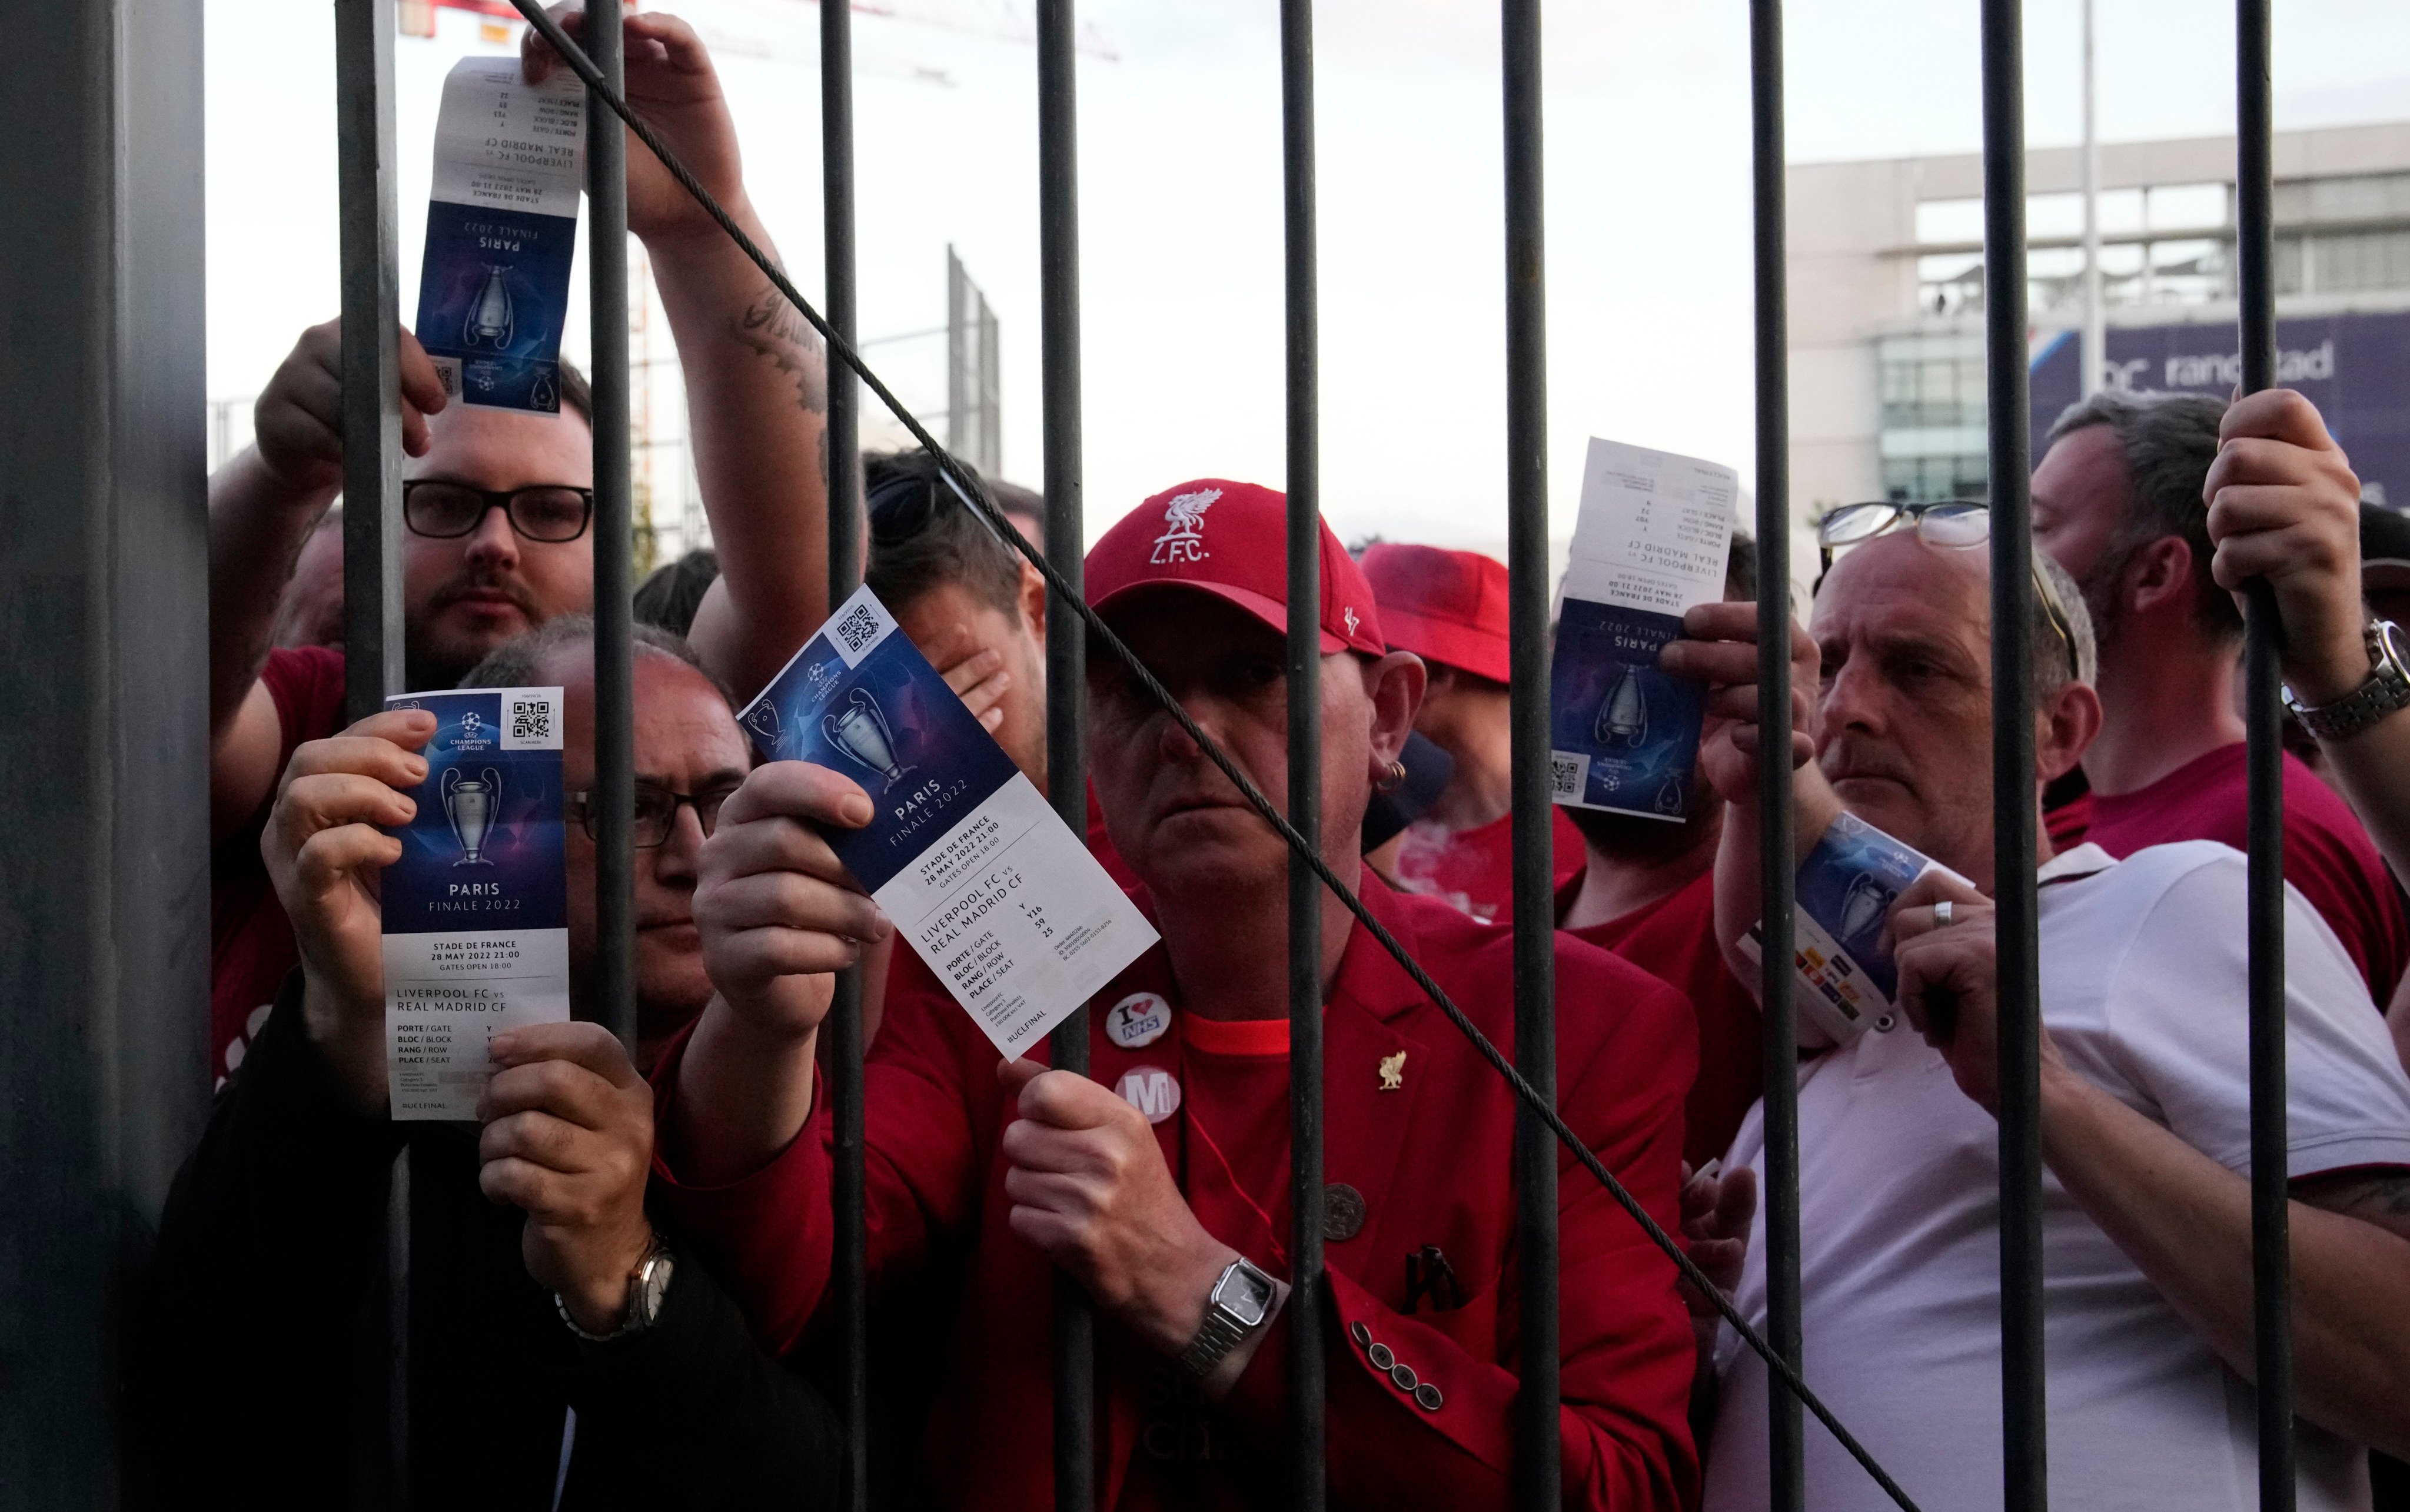 Liverpool fans show tickets and wait in front of the Stade de France before the Champions League final between Liverpool and Real Madrid. Photo: AP